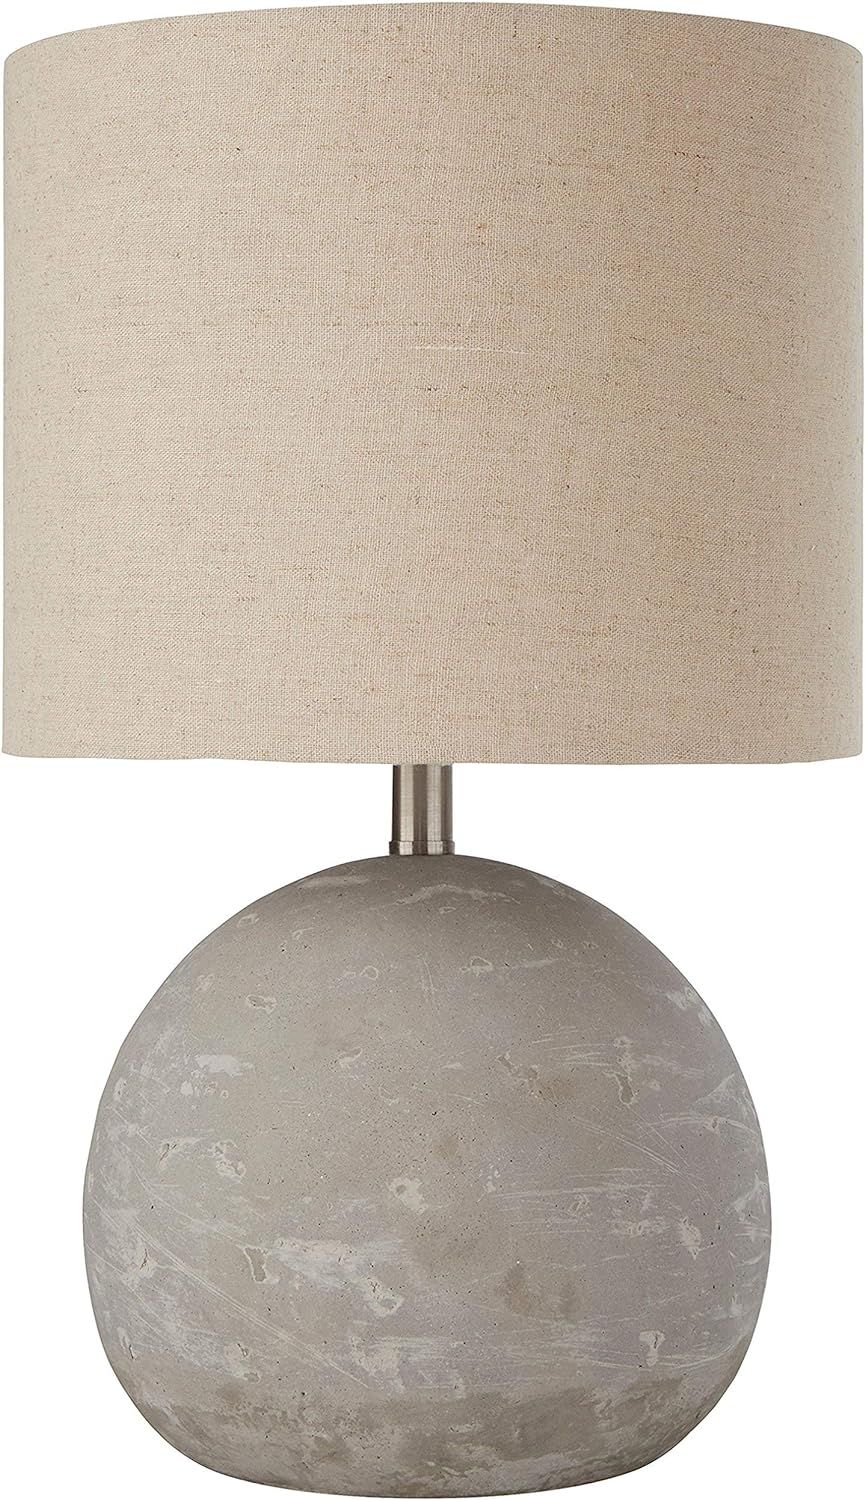 Amazon Brand – Stone & Beam Industrial Round Concrete Table Desk Lamp with Light Bulb and Beige... | Amazon (US)